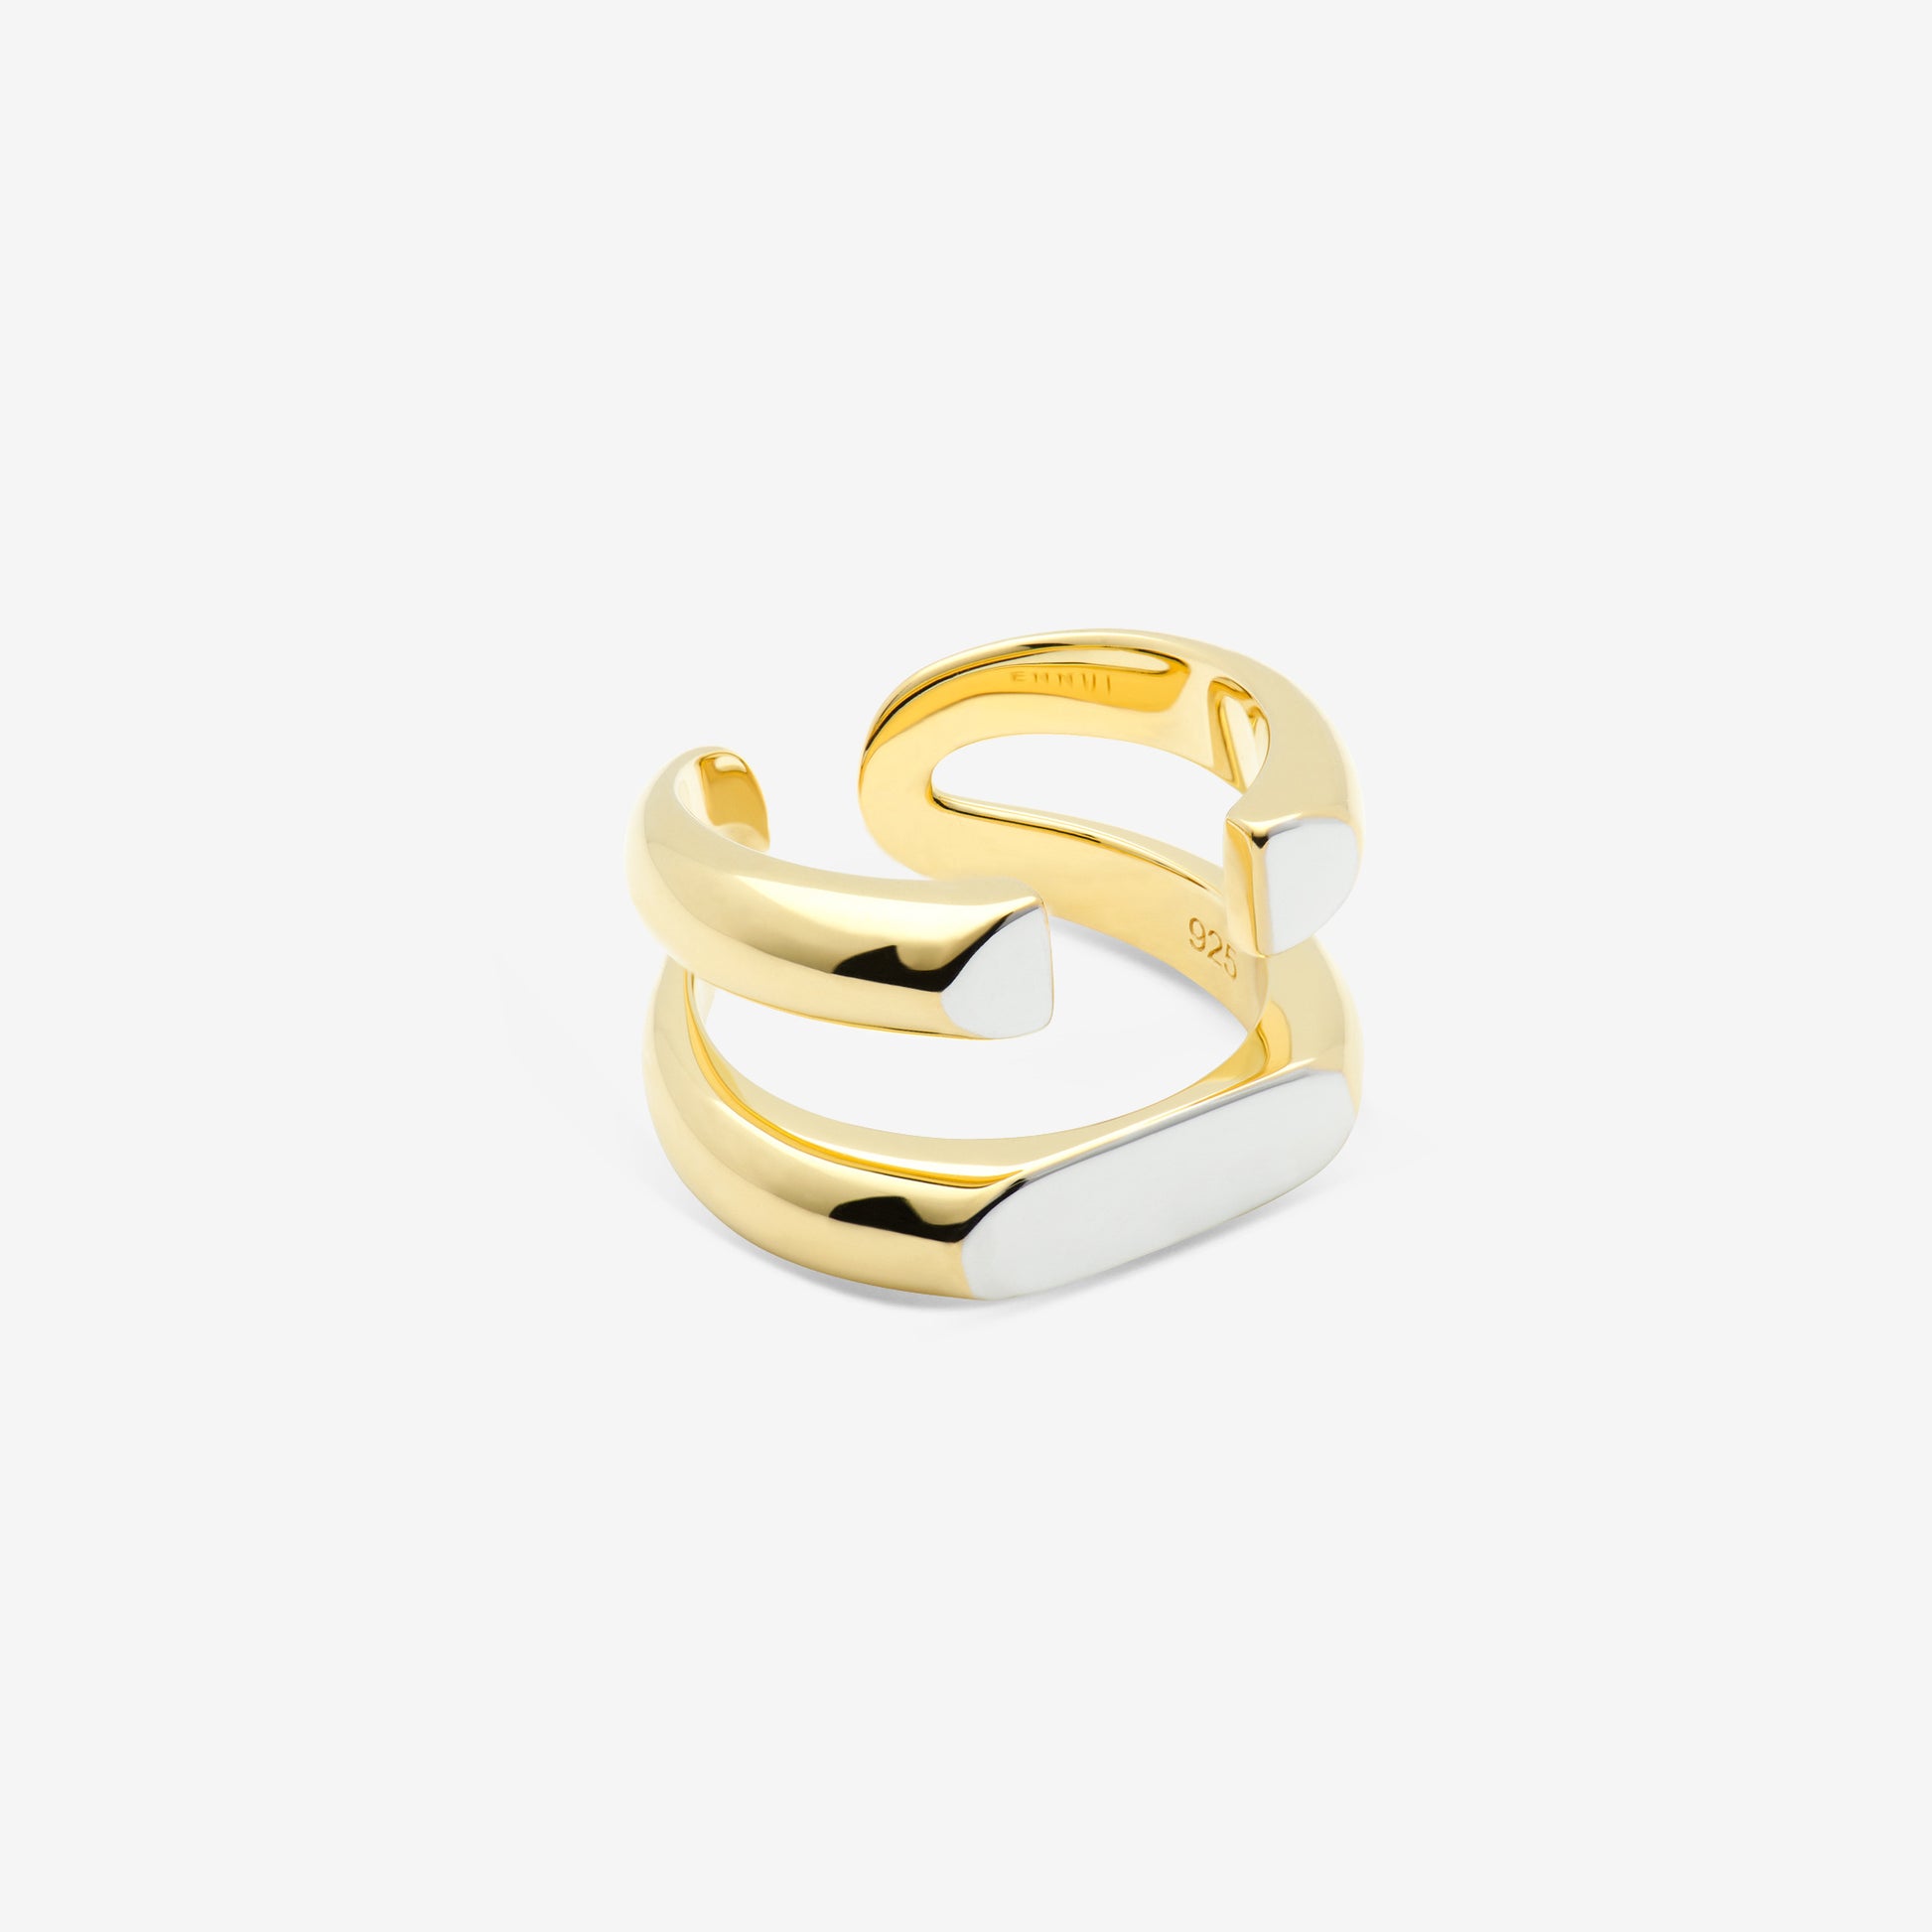 mow ring gold from ennui atelier